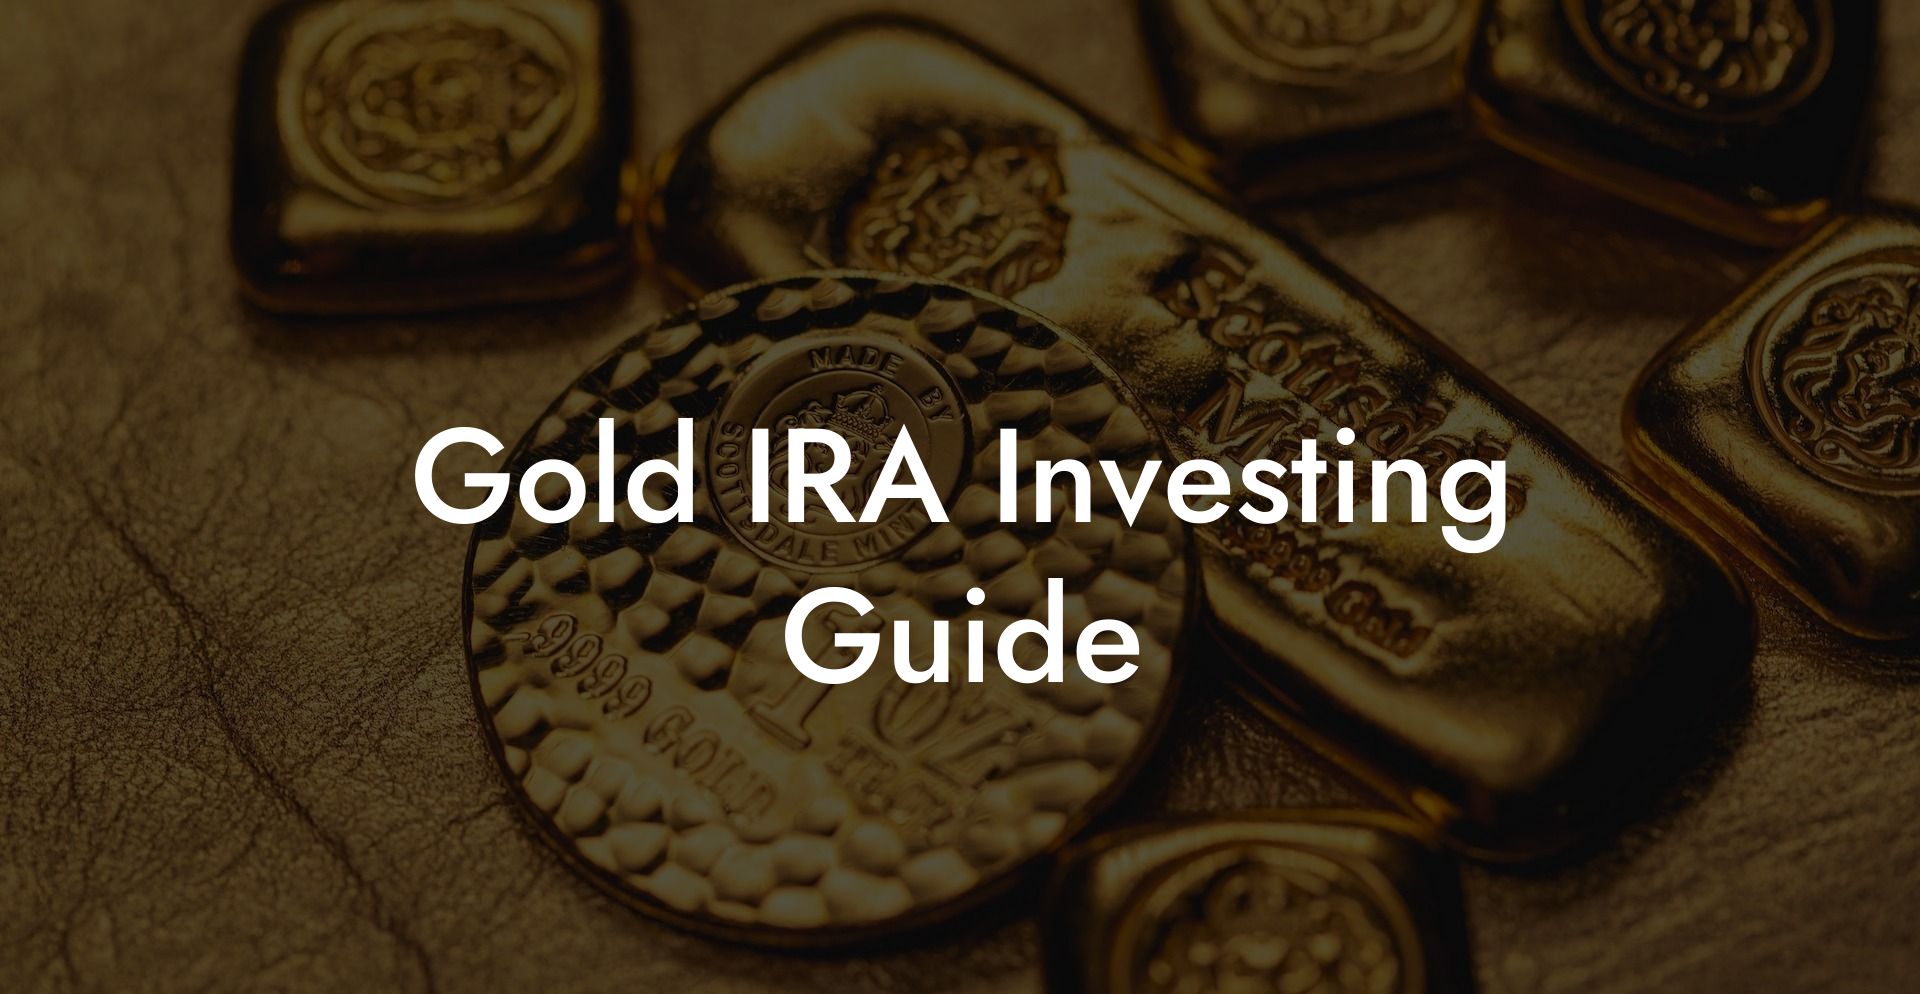 Gold IRA Investing Guide